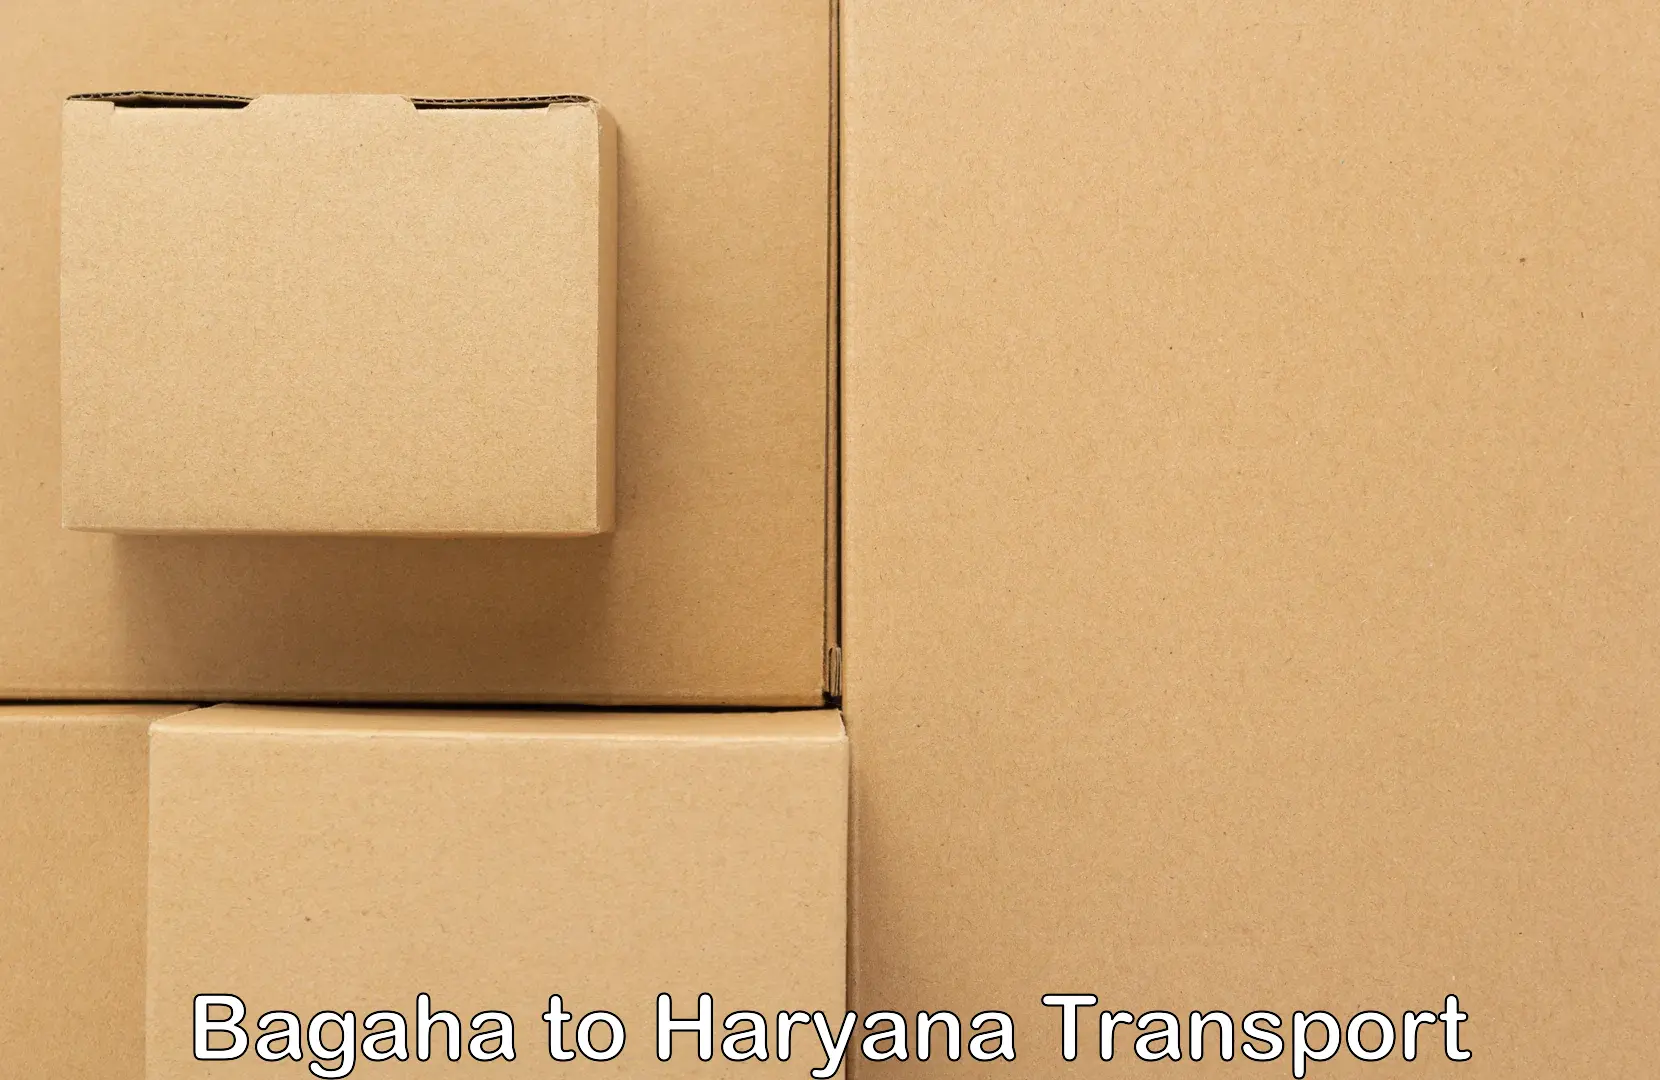 Daily parcel service transport Bagaha to Chirya